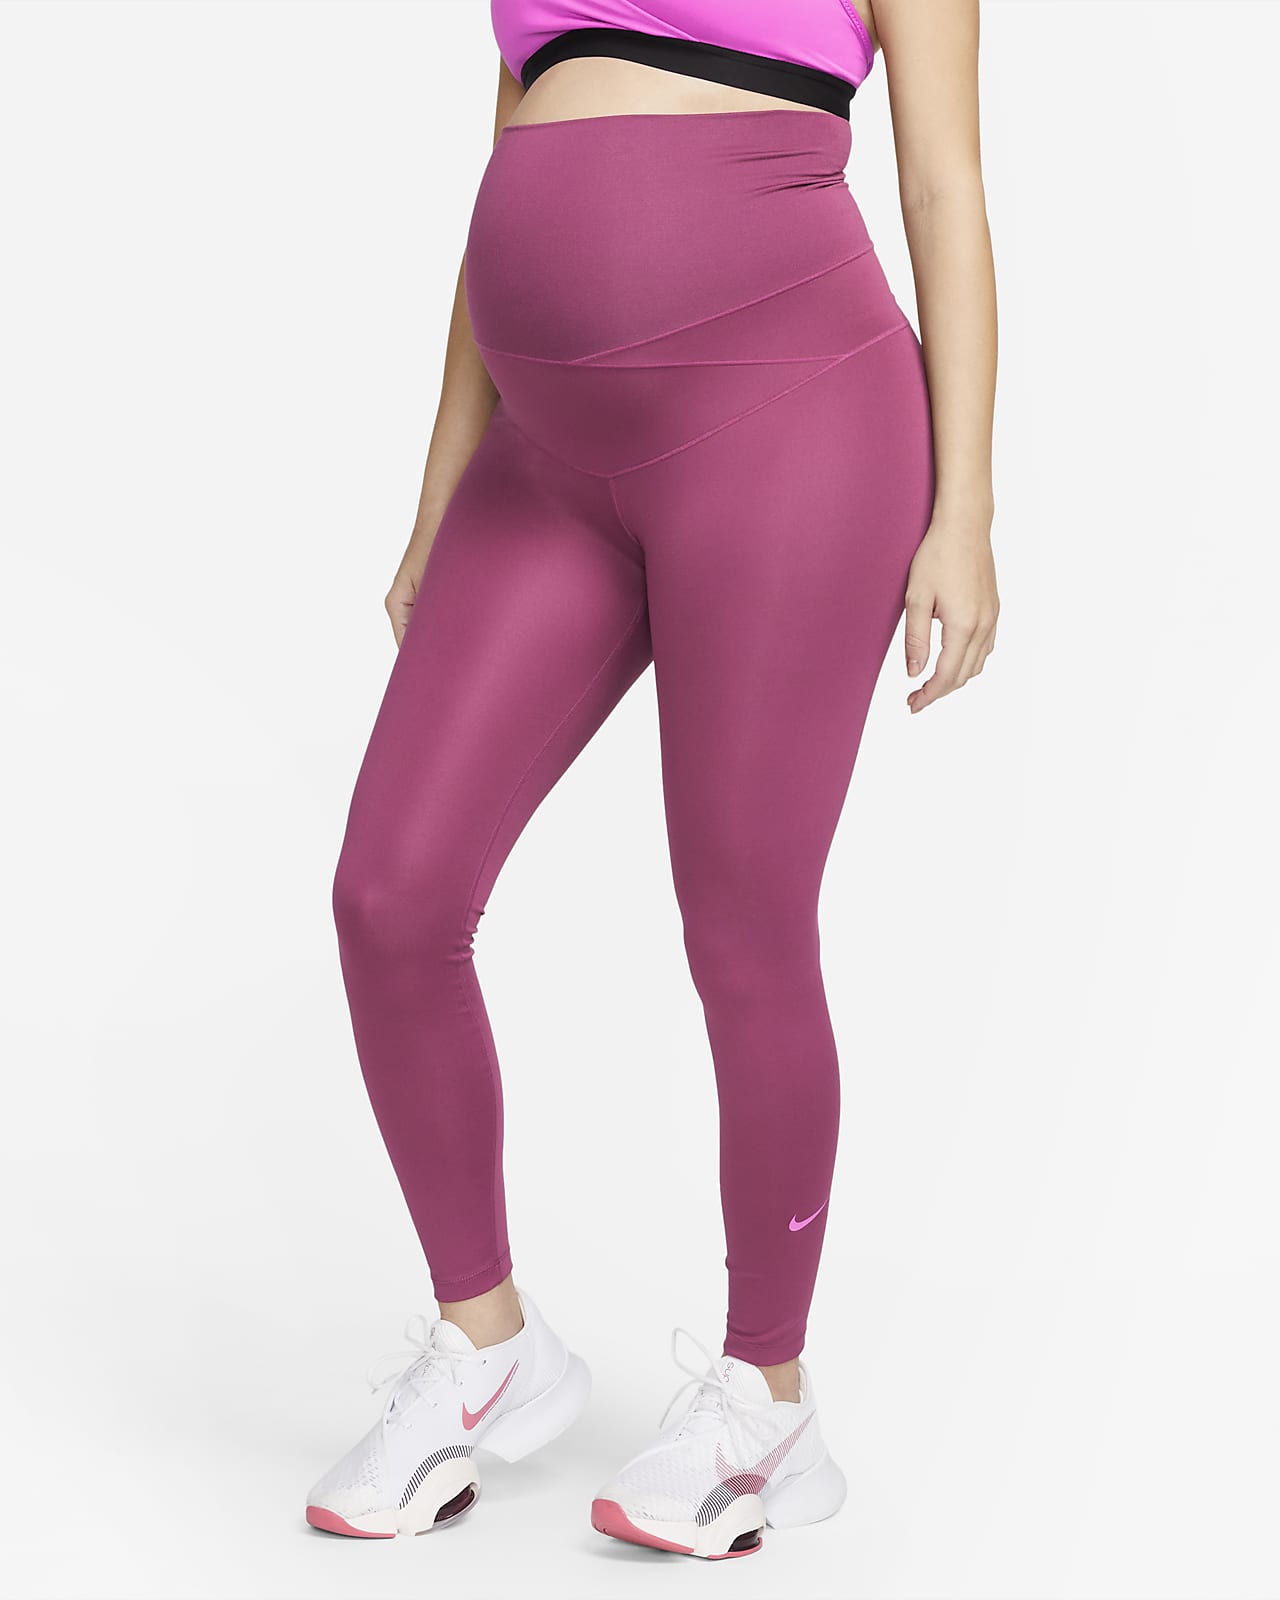 Best maternity activewear for Pregnant Mums in 2021 | Secret Saviours